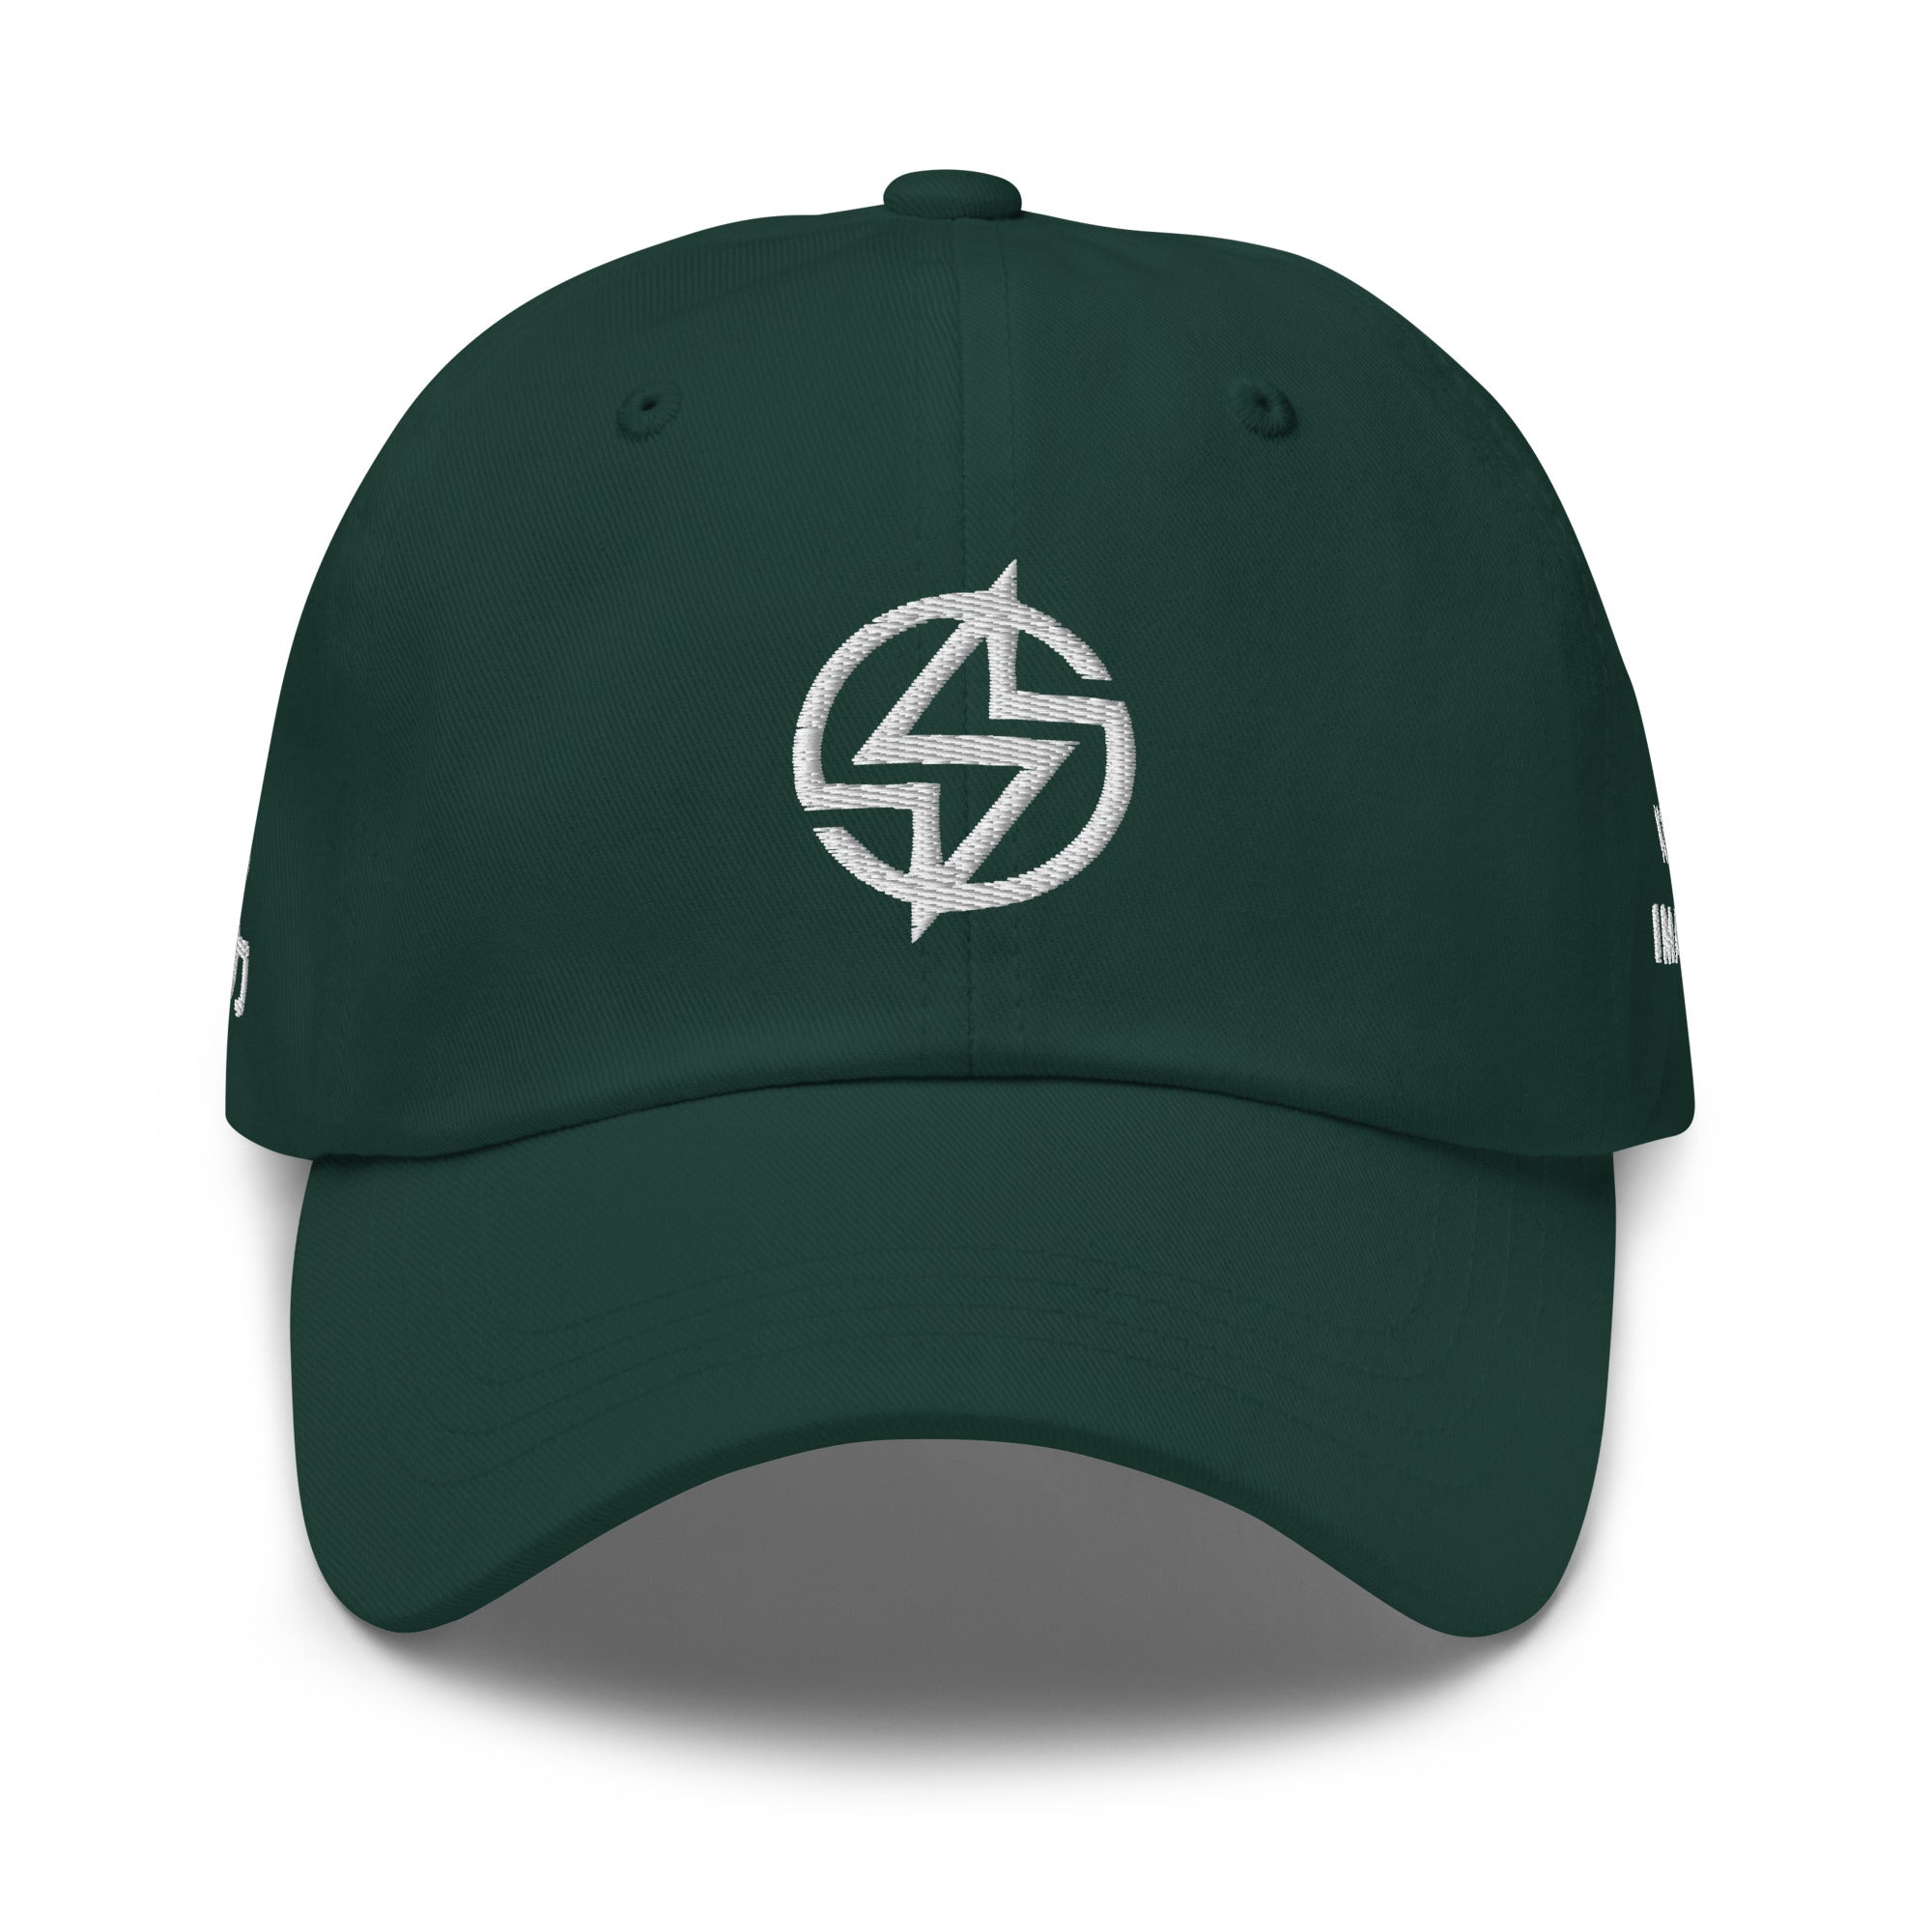 Green dad hat with white embroidery